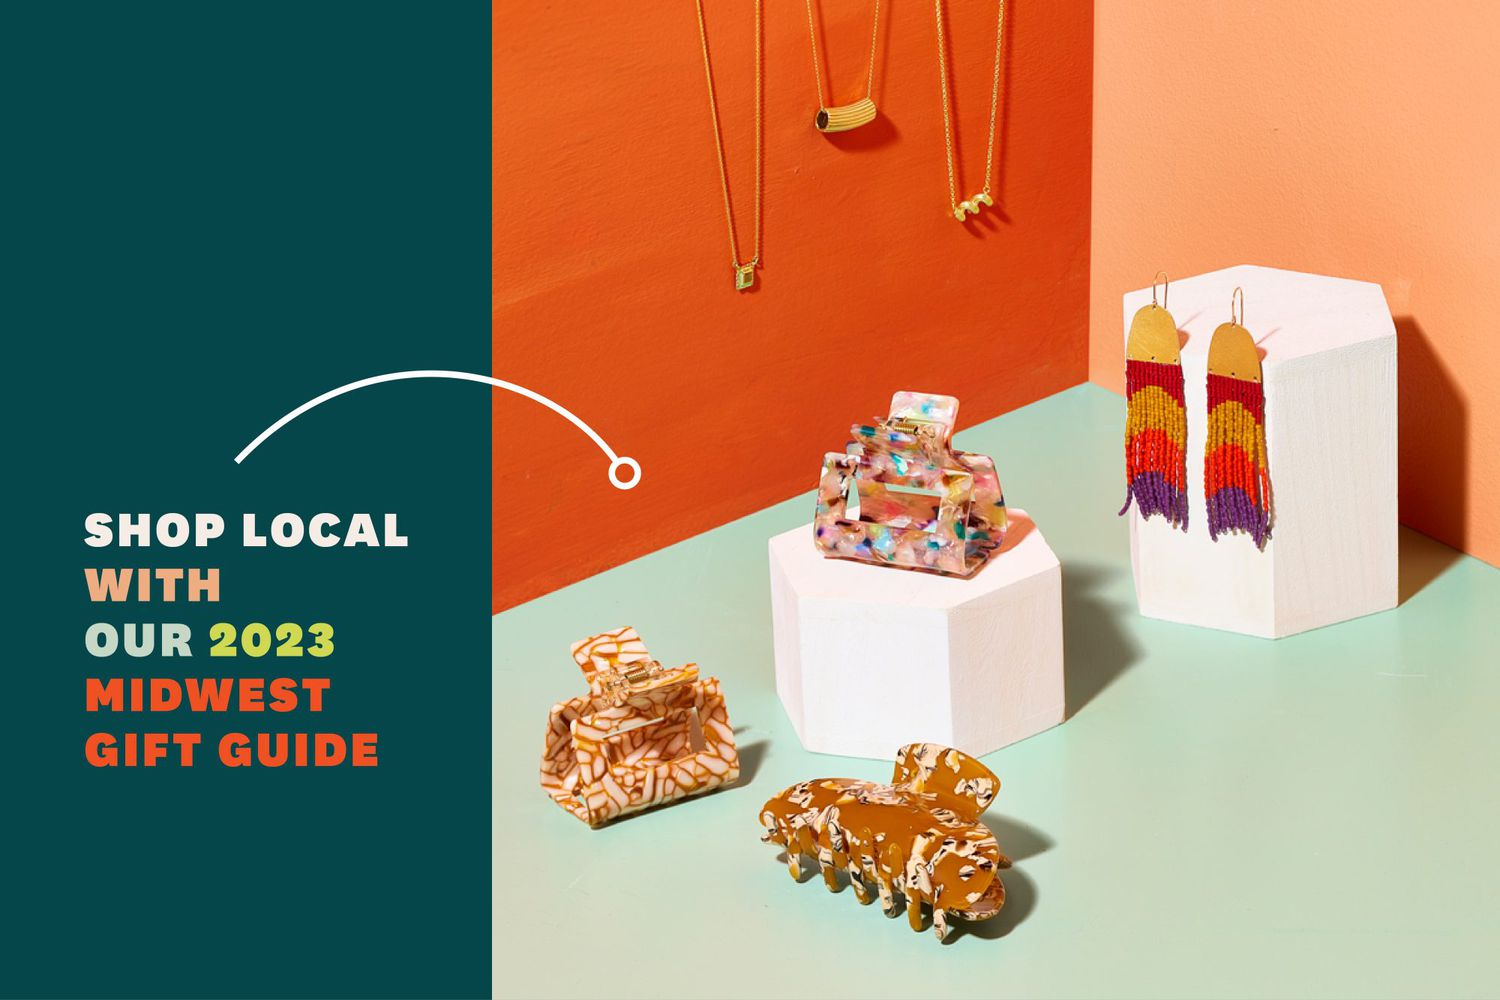 designed post with text saying "shop local with our 2023 midwest gift guide)